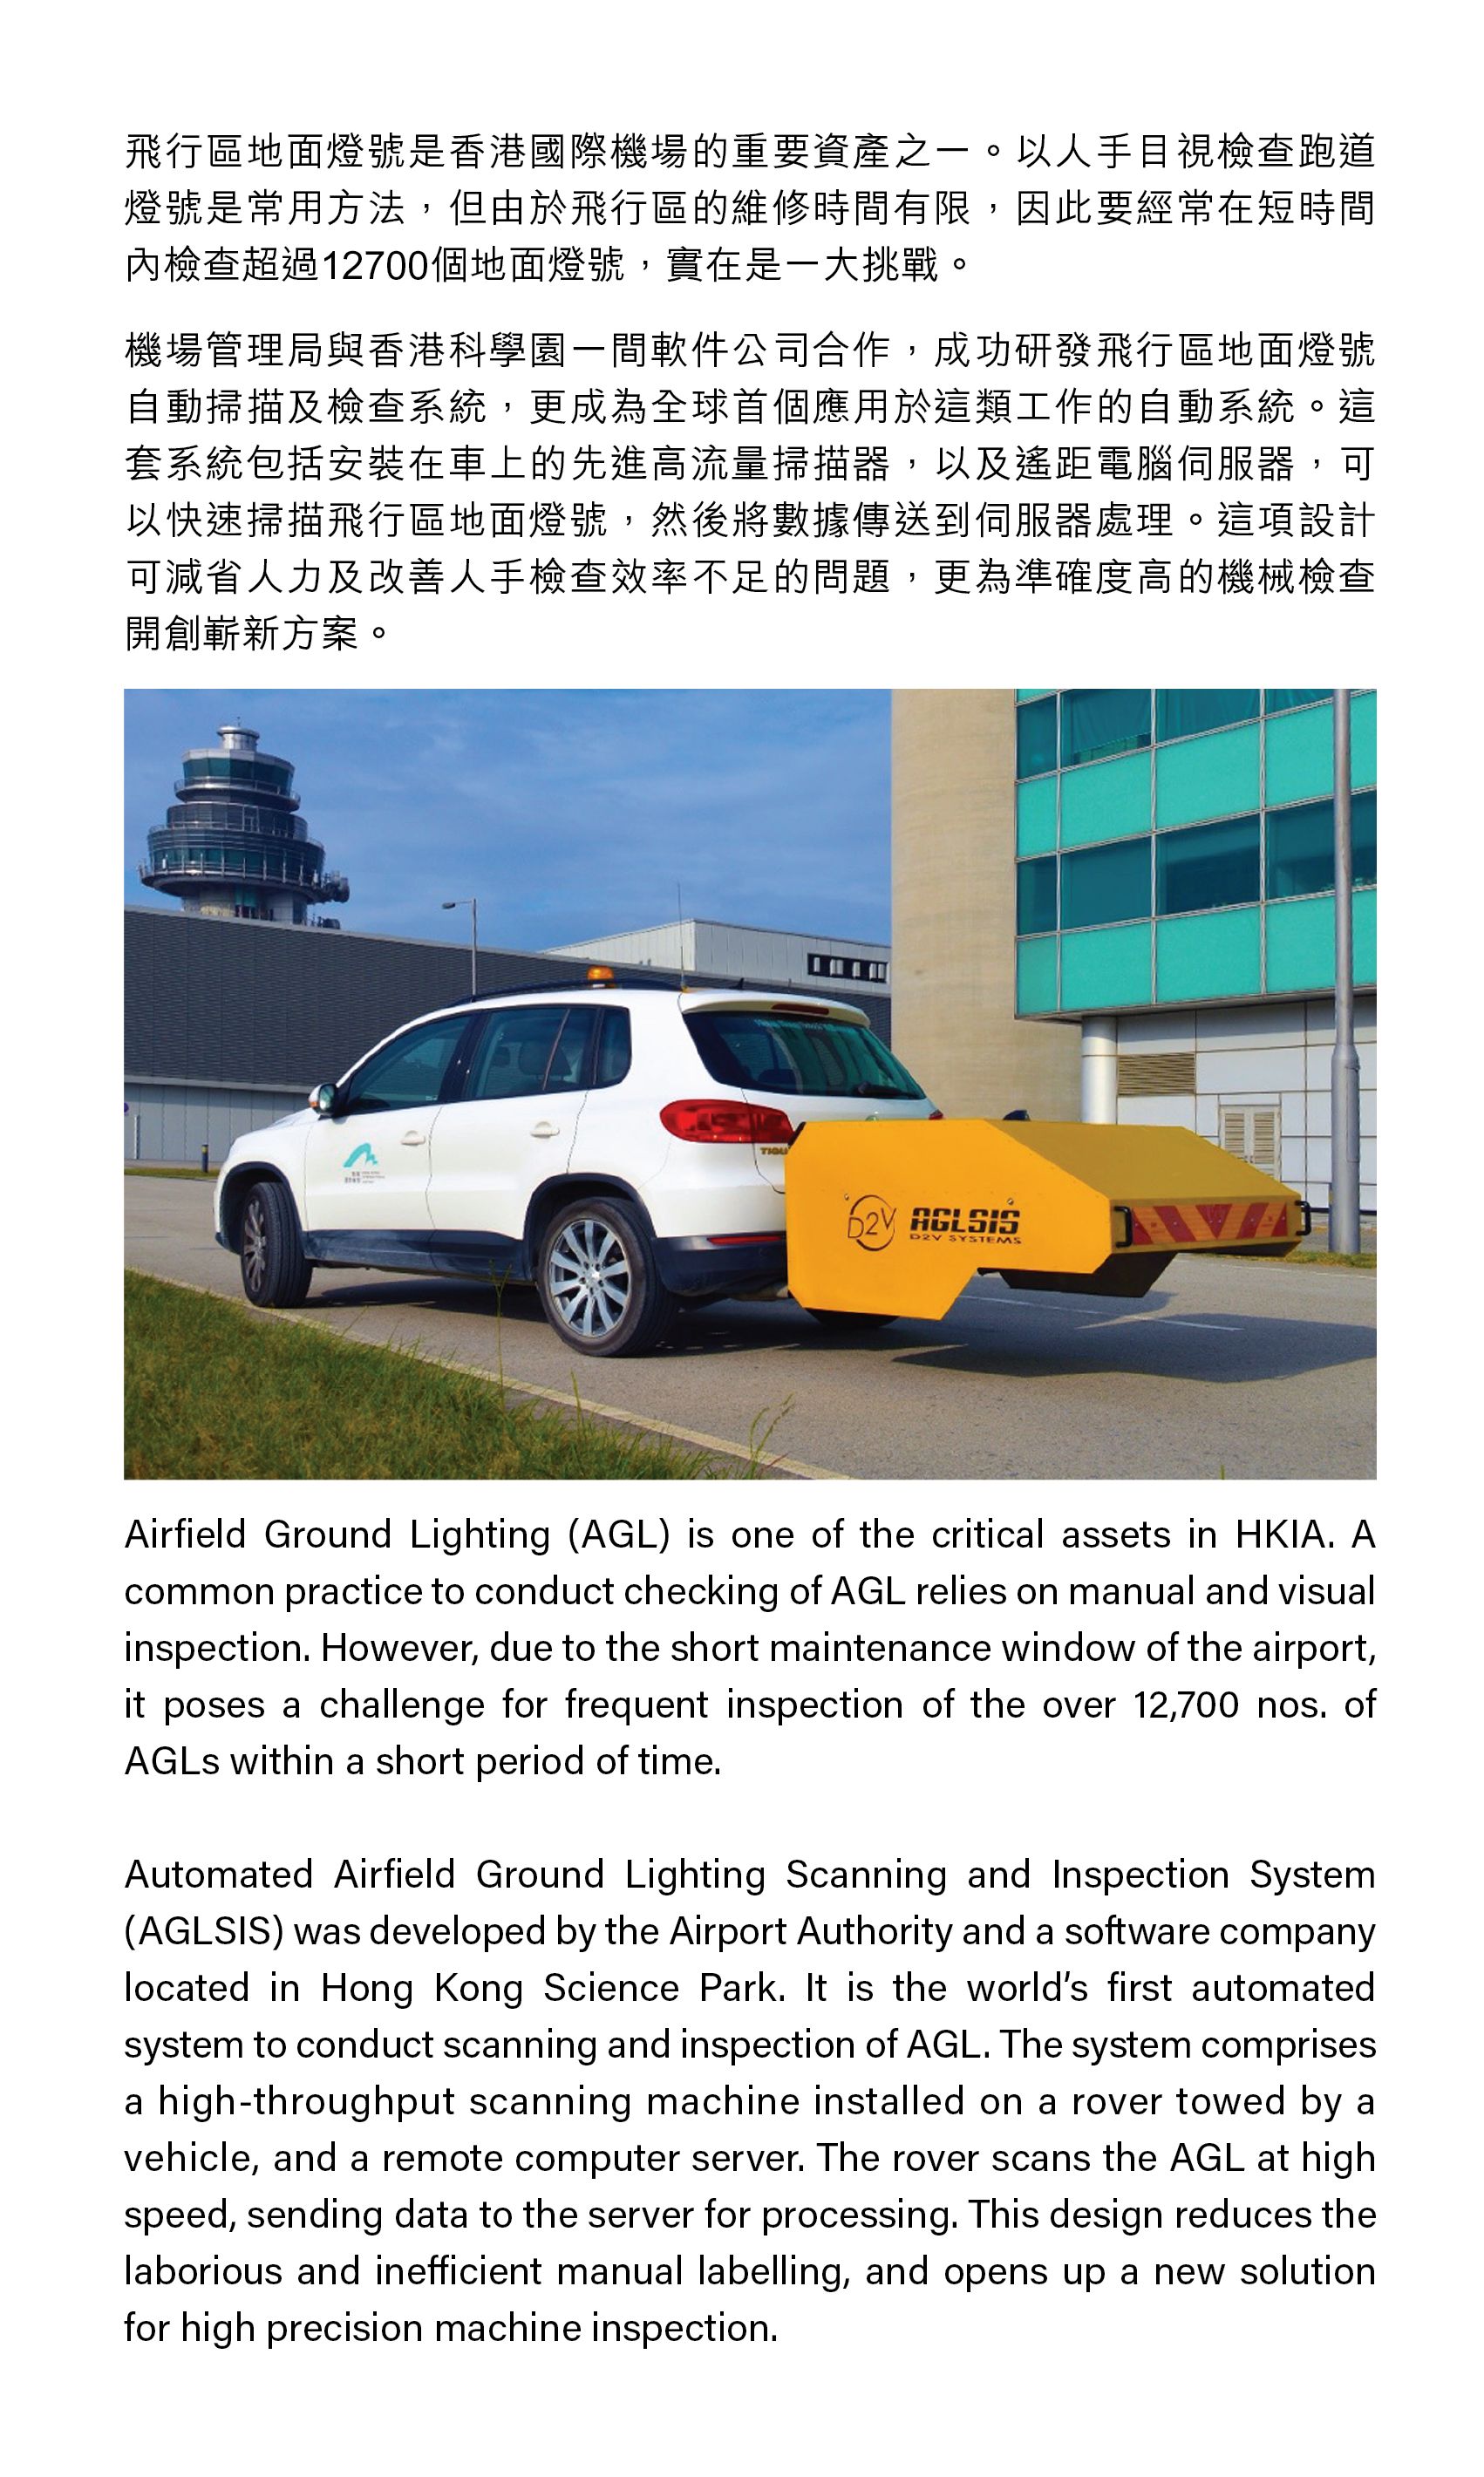 Airfield Ground Lighting (AGL) is one of the critical assets in HKIA. A common practice to conduct checking of AGL relies on manual and visual inspection. However, due to the short maintenance window of the airport, it poses a challenge for frequent inspection of the over 12,700 nos. of AGLs within a short period of time. Automated Airfield Ground Lighting Scanning and Inspection System (AGLSIS) was developed by the Airport Authority and a software company located in Hong Kong Science Park. It is the world’s first automated system to conduct scanning and inspection of AGL. The system comprises a high-throughput scanning machine installed on a rover towed by a vehicle, and a remote computer server. The rover scans the AGL at high speed, sending data to the server for processing. This design reduces the laborious and inefficient manual labelling, and opens up a new solution for high precision machine inspection.